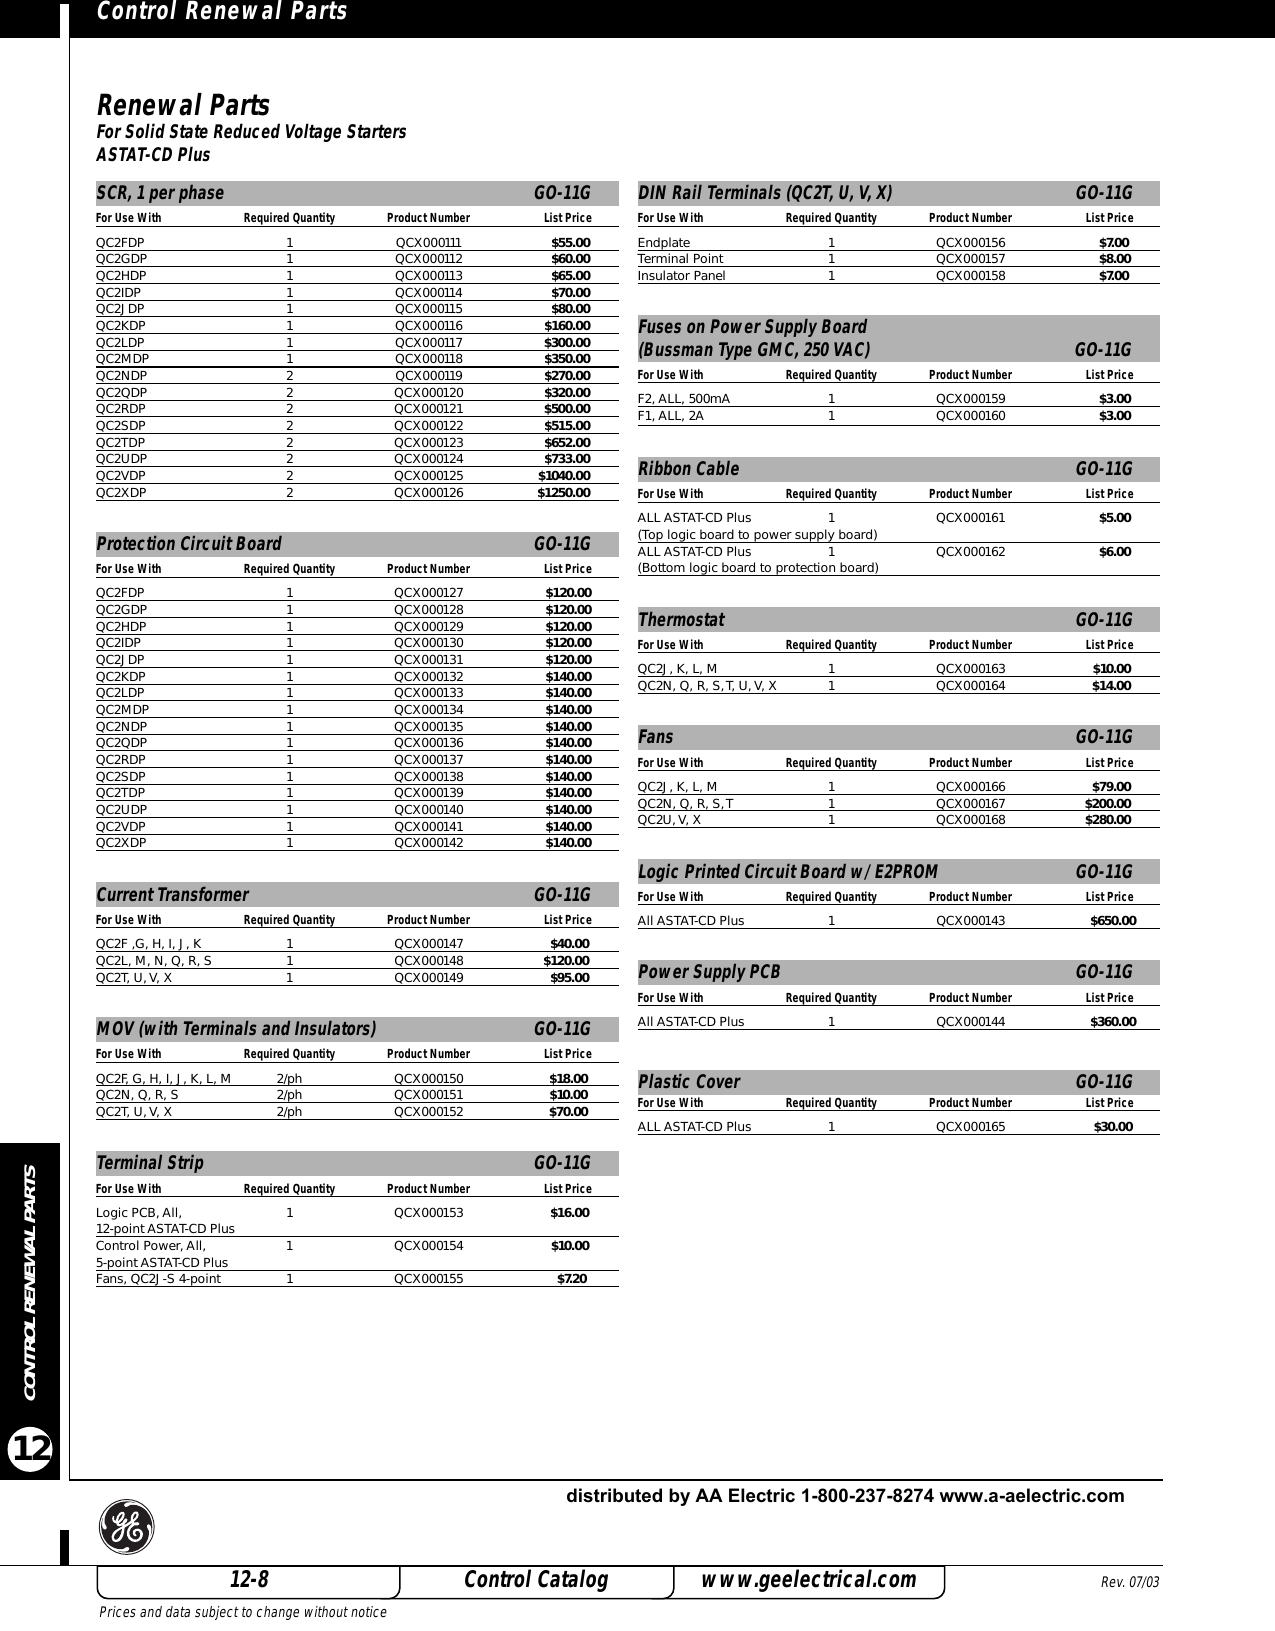 Page 8 of 8 - GE 2005 Control Catalog - Section 12  522426-Catalog